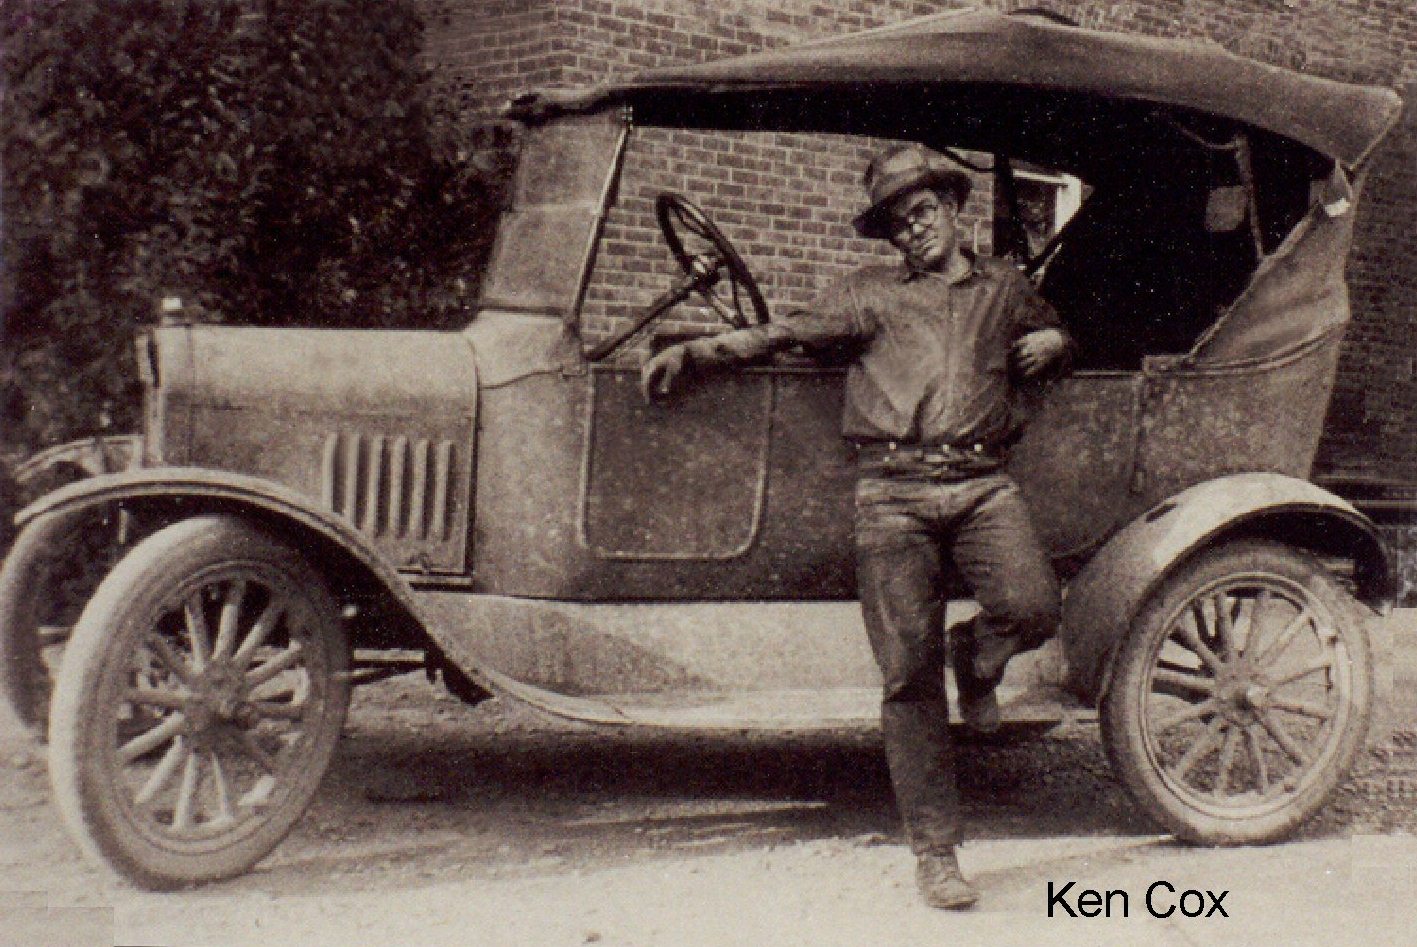 WCHS-01096 Ken Cox with his homemade car in 1931